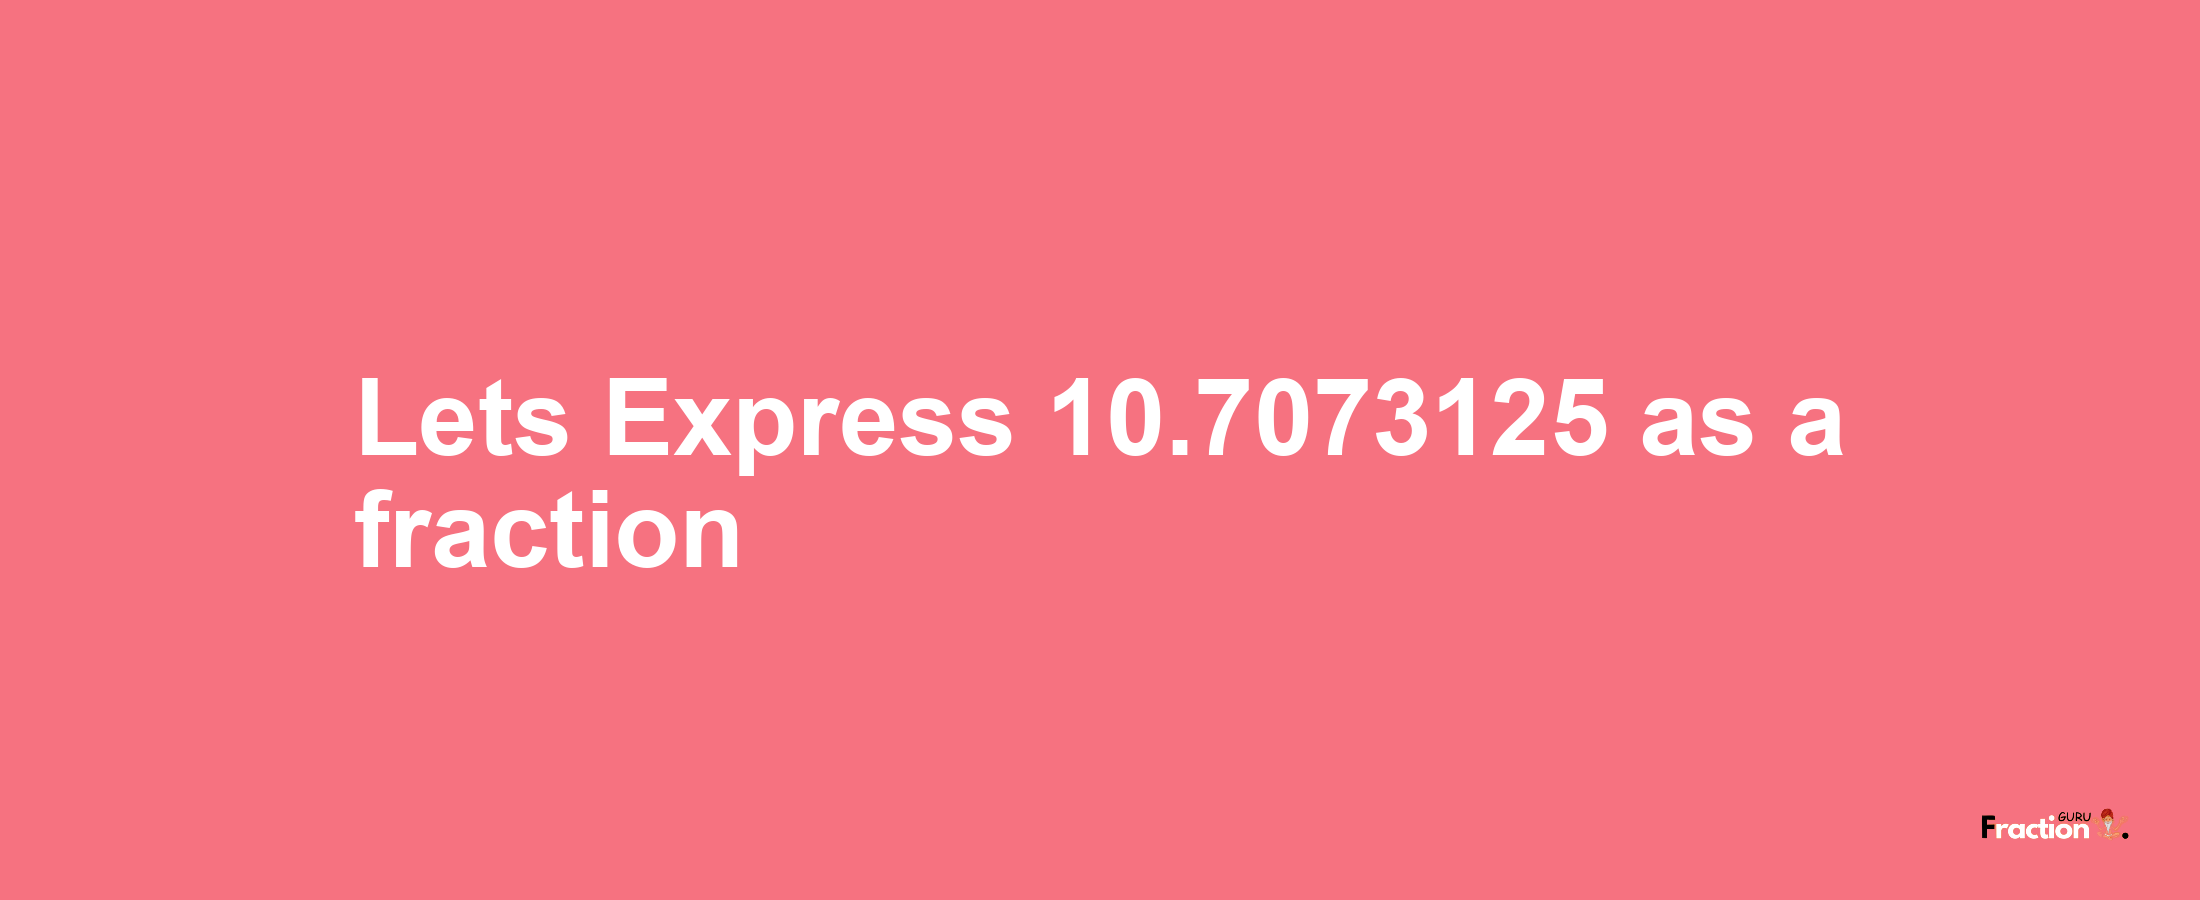 Lets Express 10.7073125 as afraction